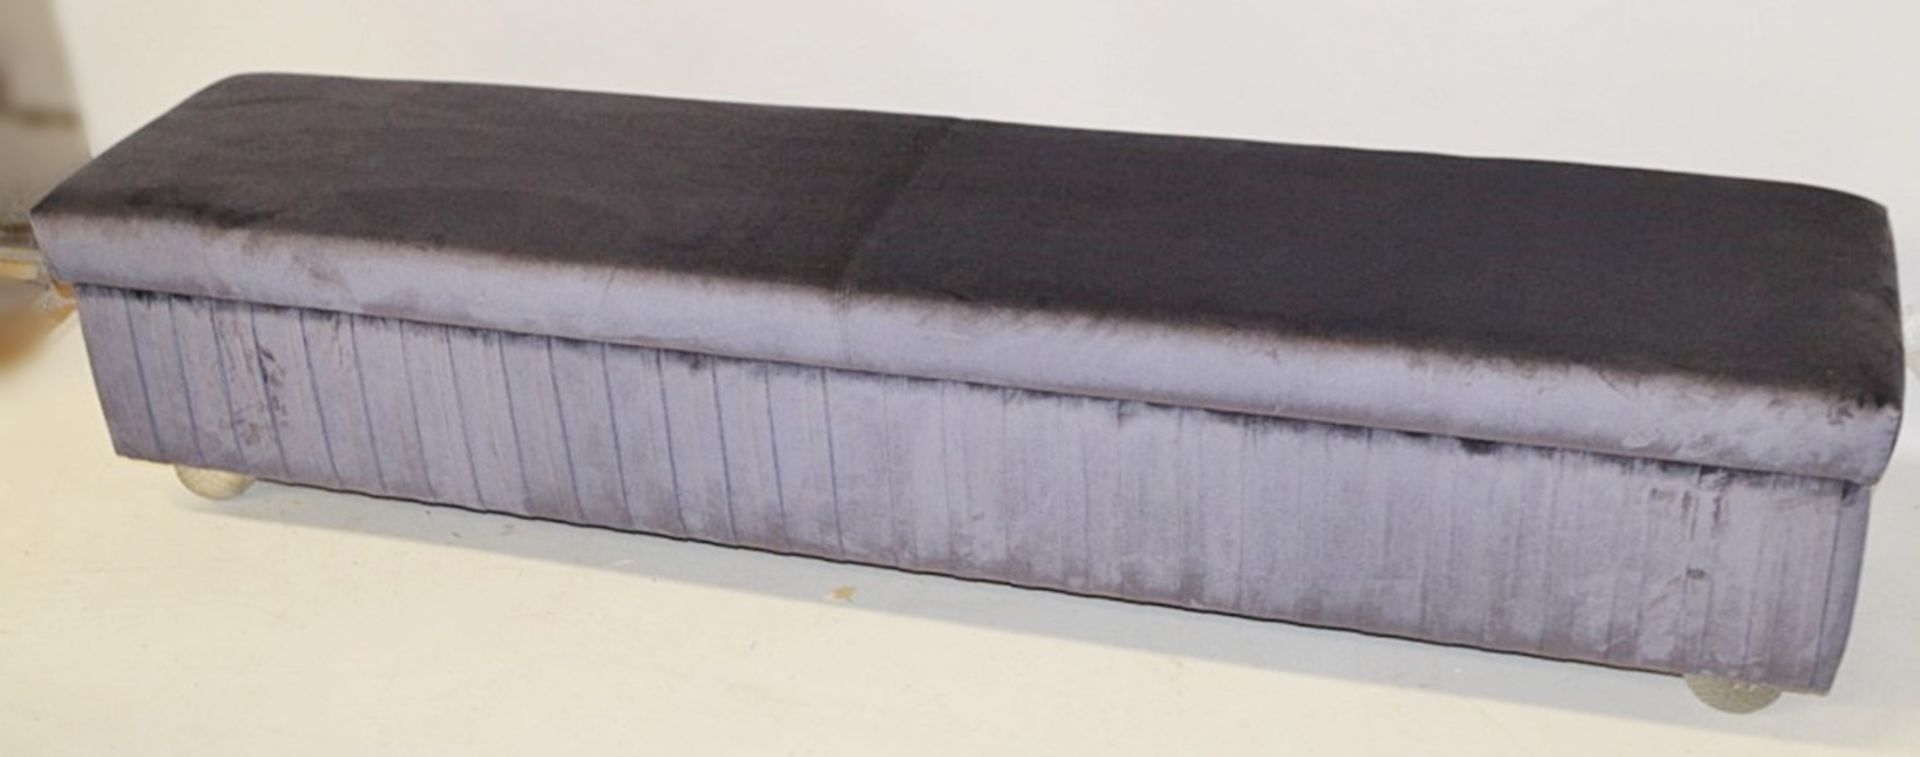 1 x REFLEX 'Plisse' Pleated Ottoman / Bedroom Bench In Plum With 'Illuminated' Spherical Glass Feet - Image 8 of 11